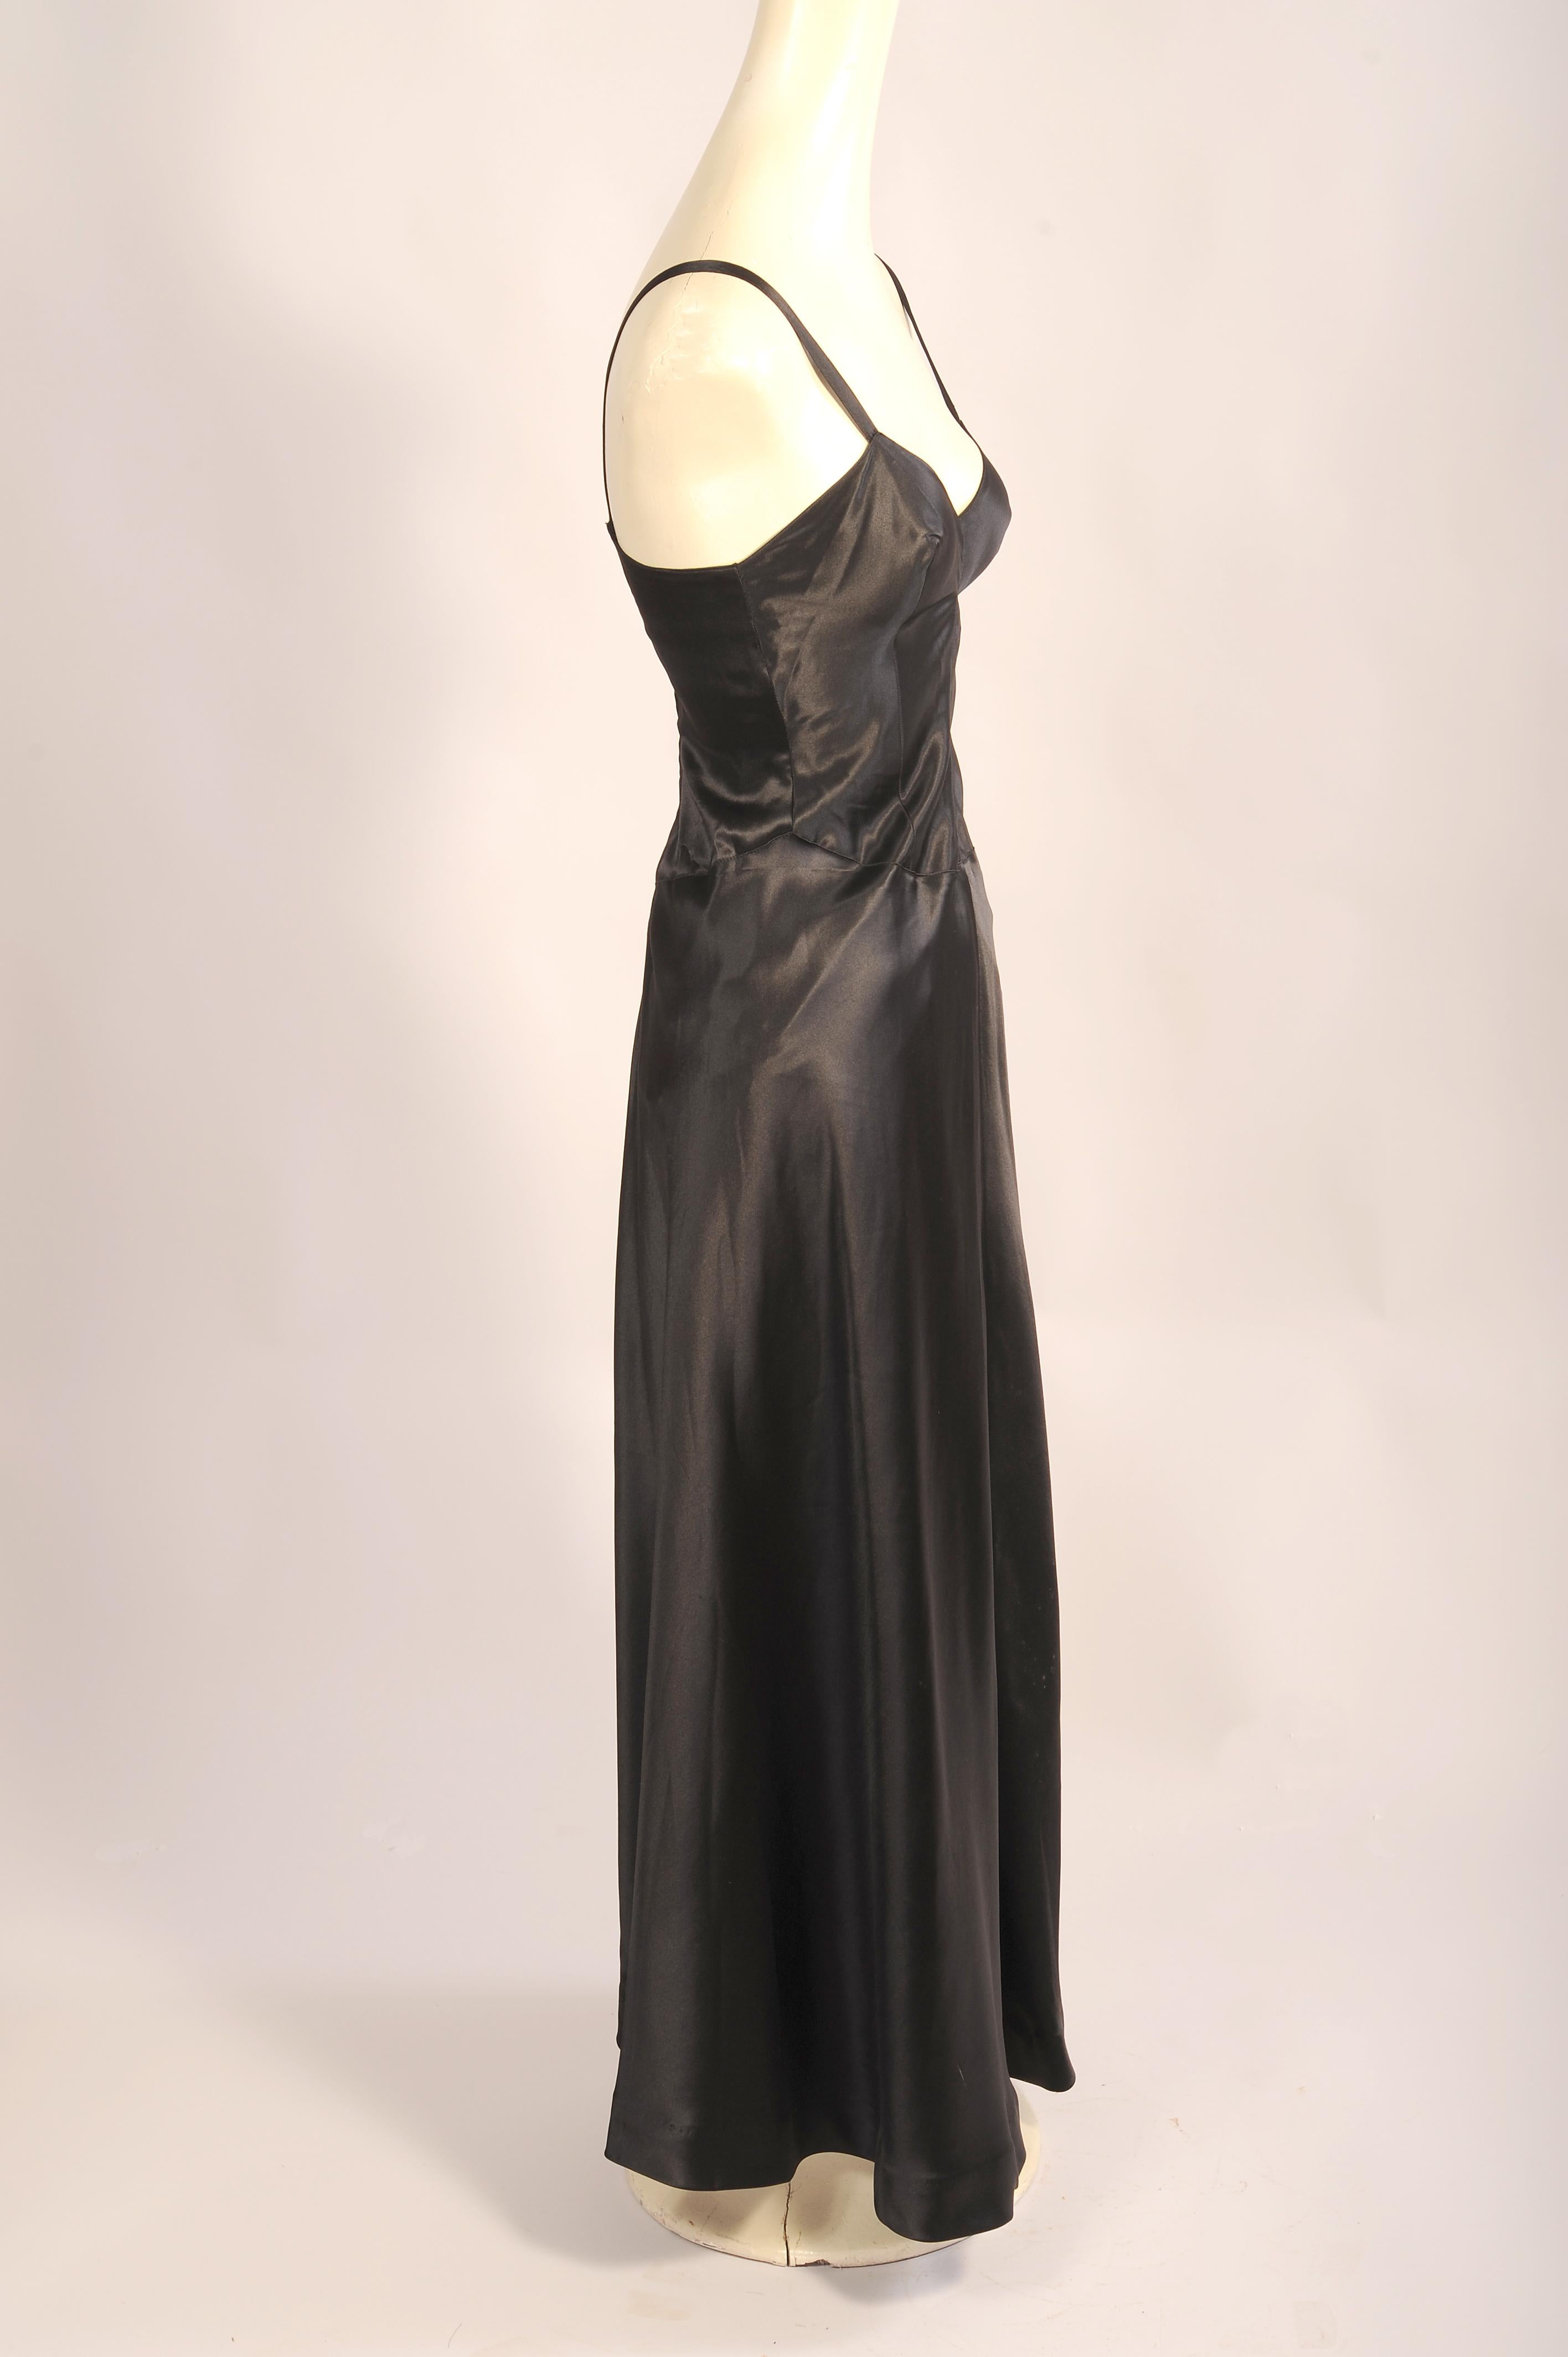 This is such an unusual design, a black bias cut silk satin slip/dress with garters as an integral part of the design which was created by laure Belin in Paris. She was a well regarded designer who held fashion shows at the finest hotels in paris.